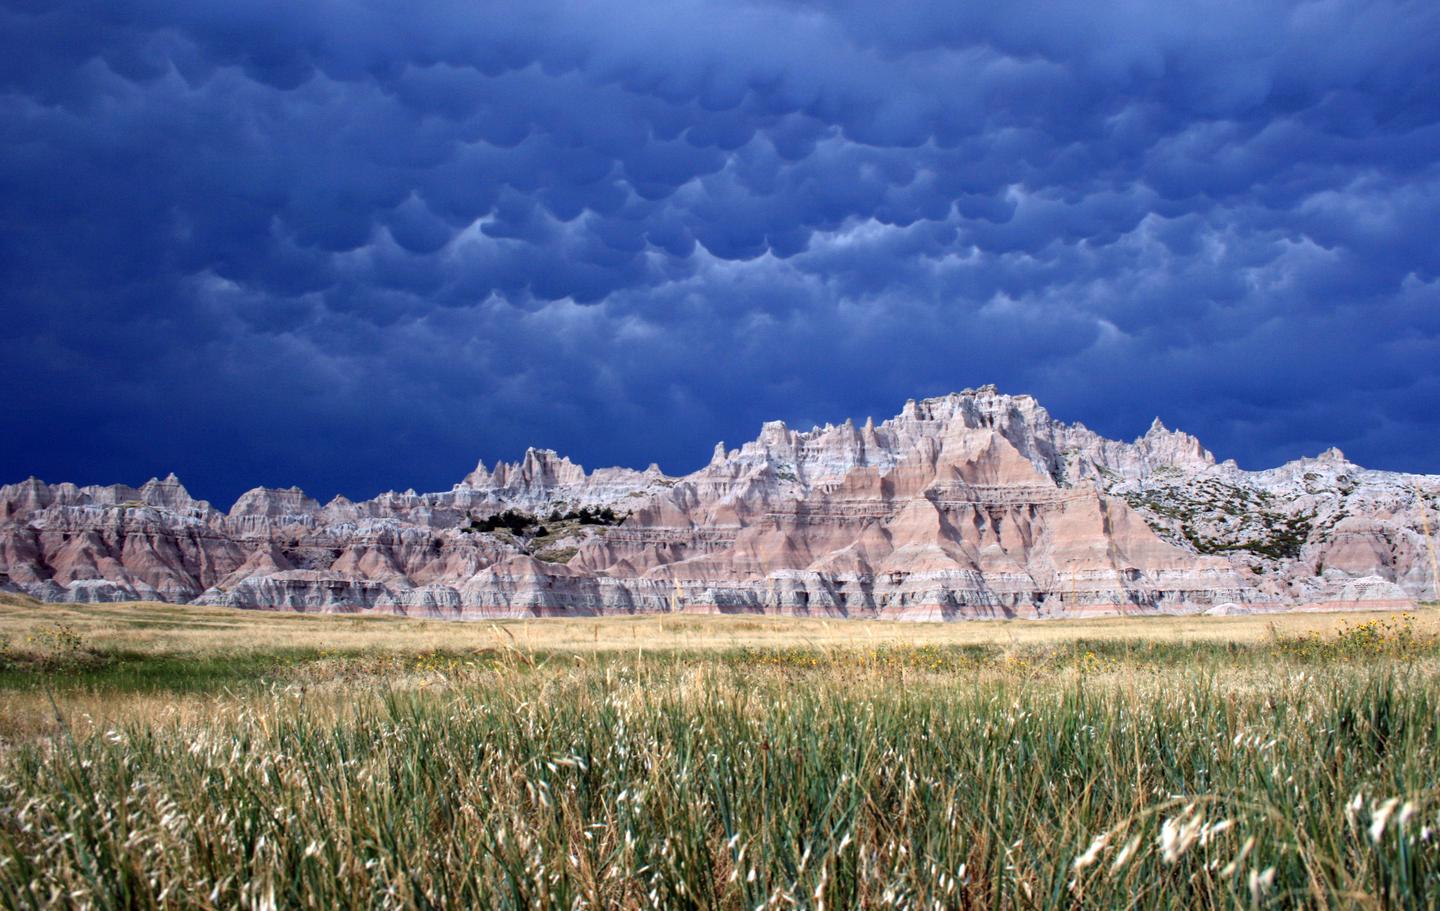 Badlands StormSummer storms are frequently violent and unpredictable.